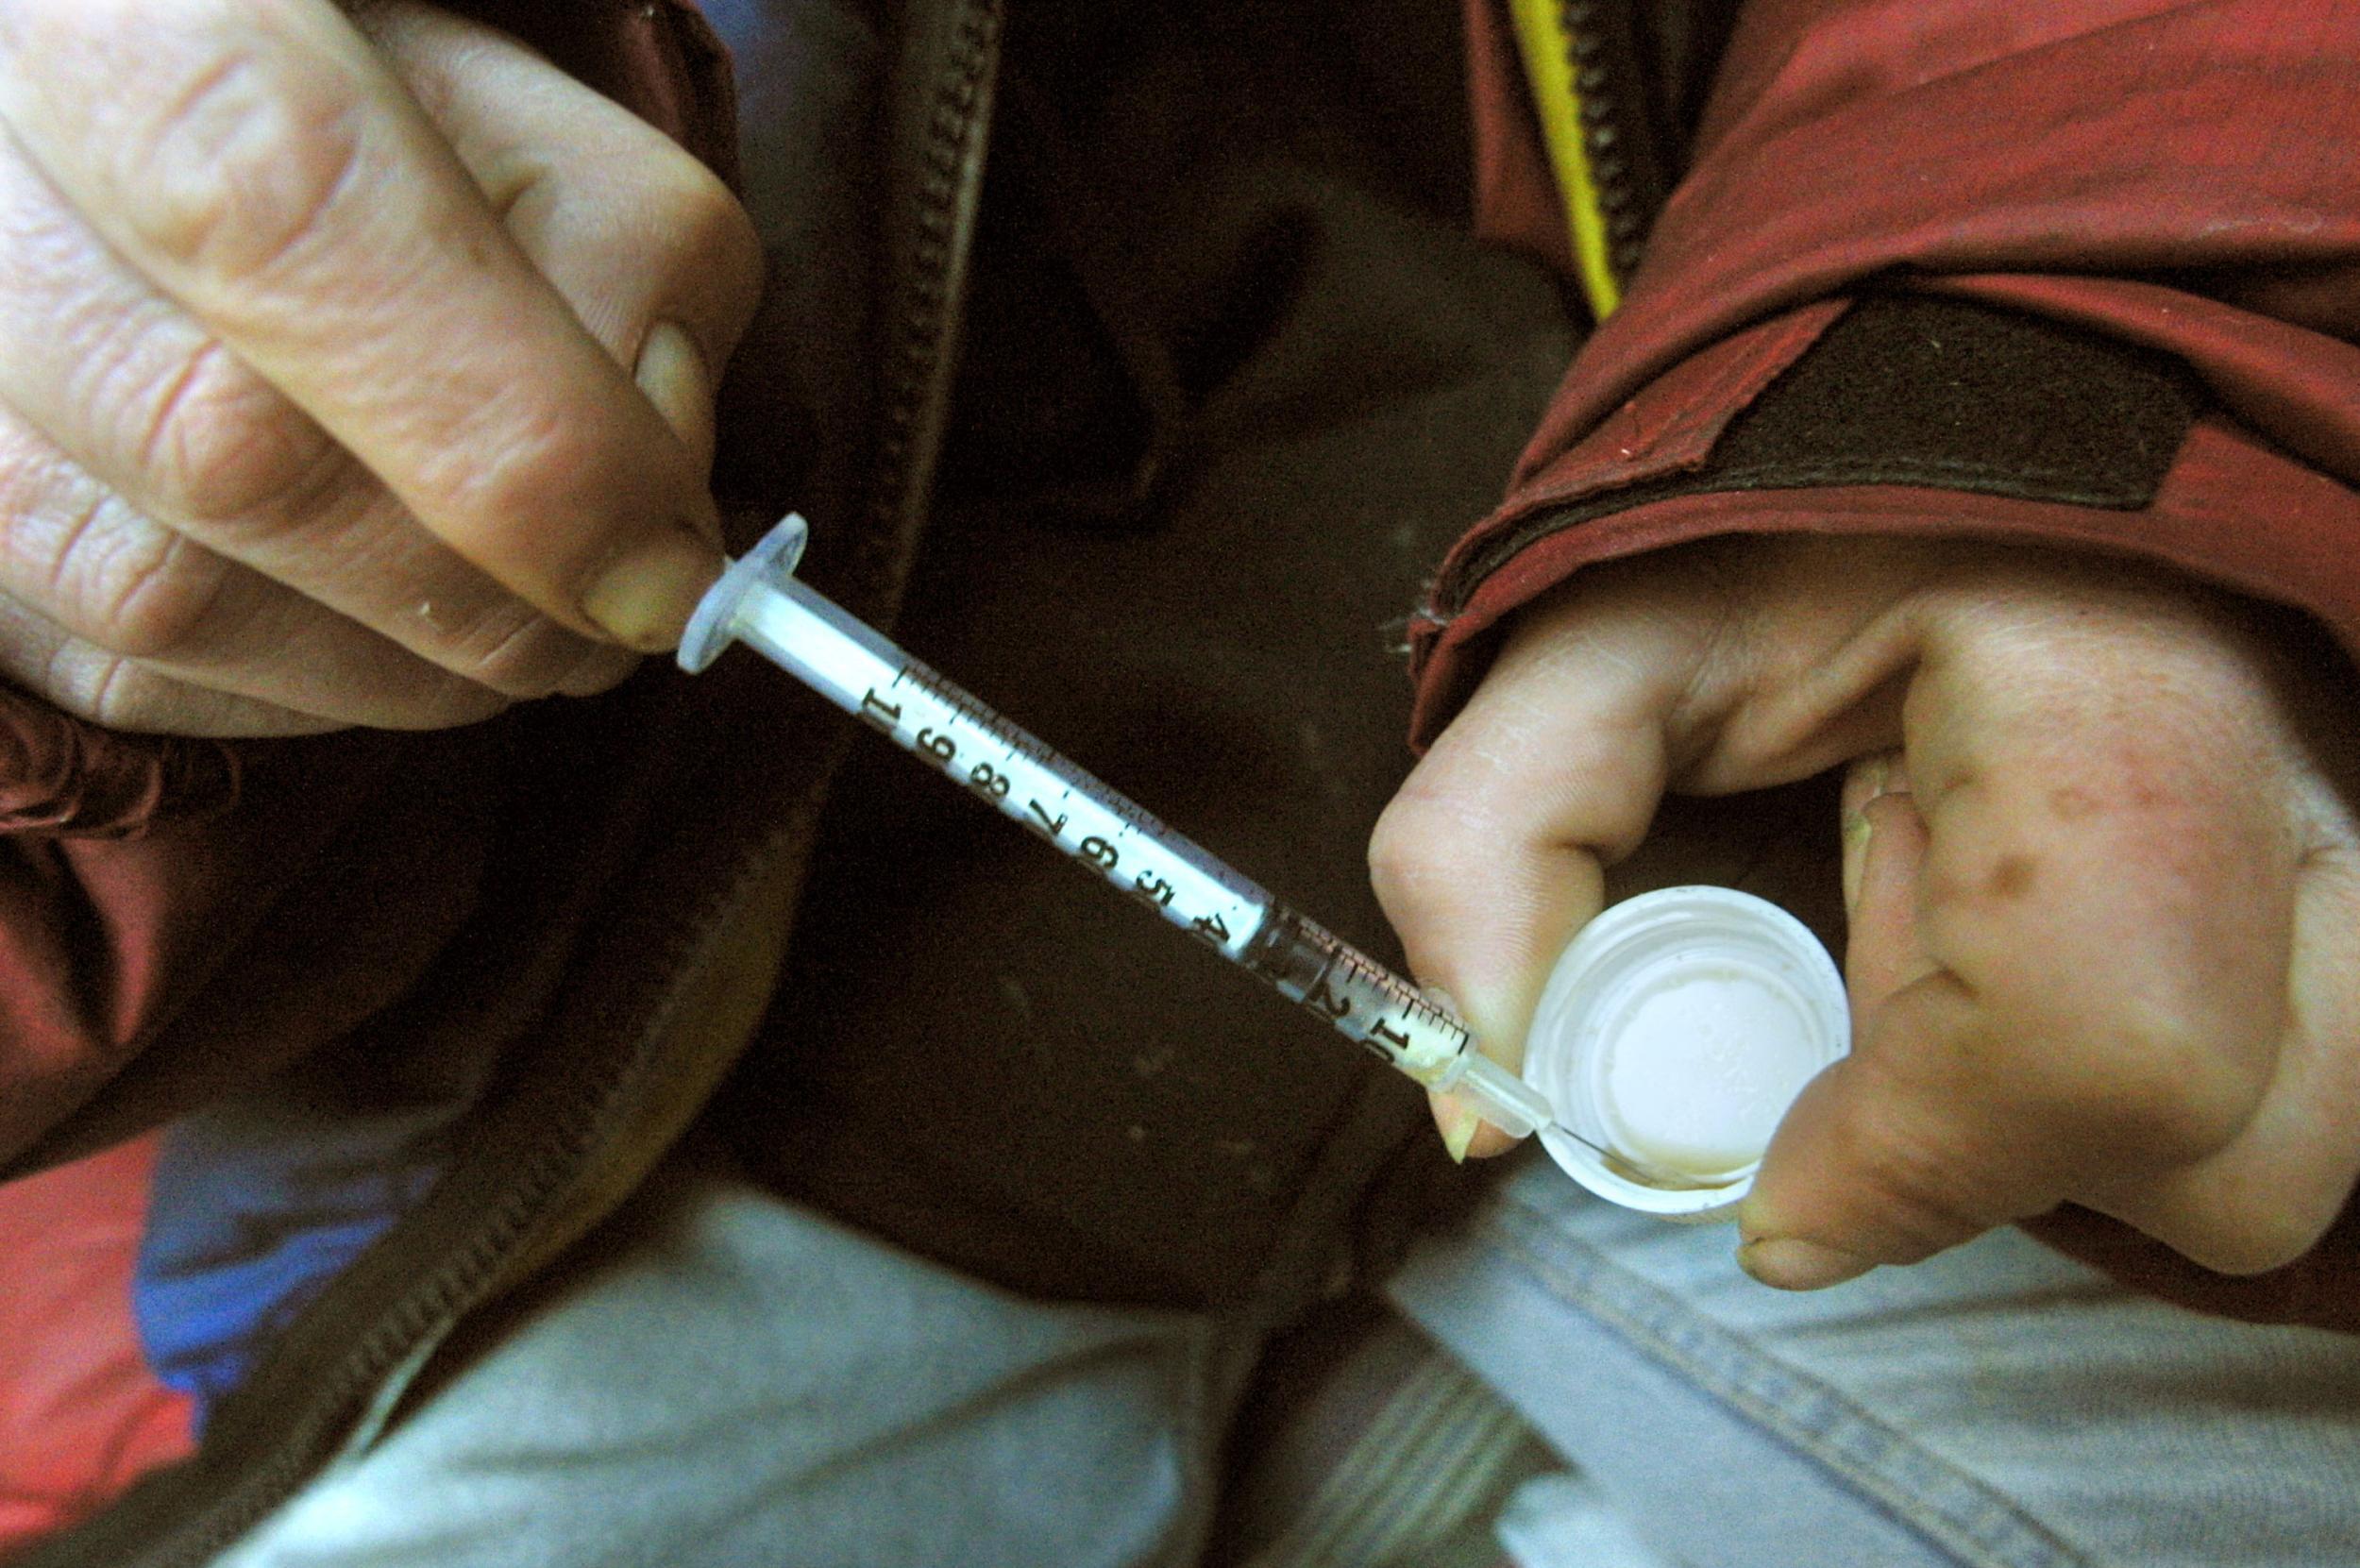 Homeless woman Joan Kimball, 37, prepares to injects herself with heroin beneath the Manhattan bridge where she lives